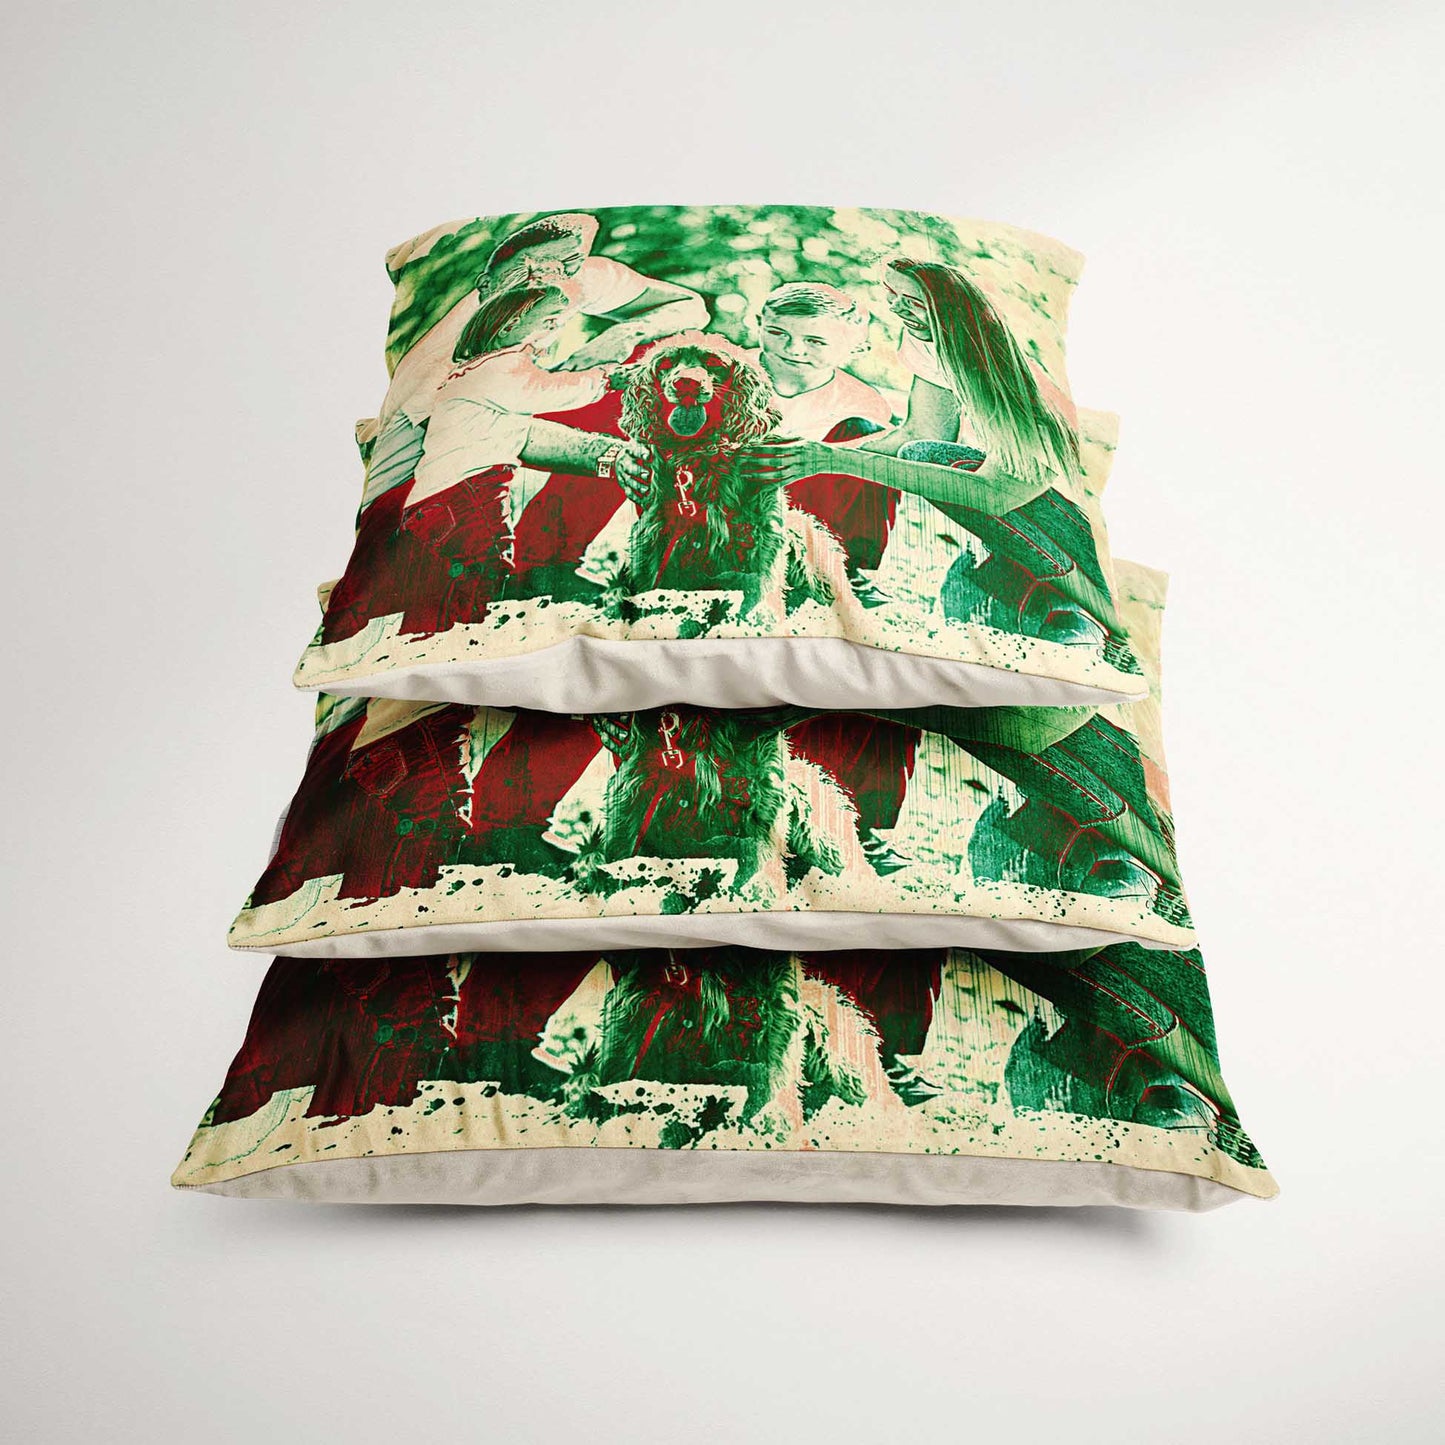 Elevate your home decor with the Personalised Green & Red Cushion. Made with precision and care, this handmade cushion showcases creativity and originality. Its sharp and vivid colors, printed on velvet fabric